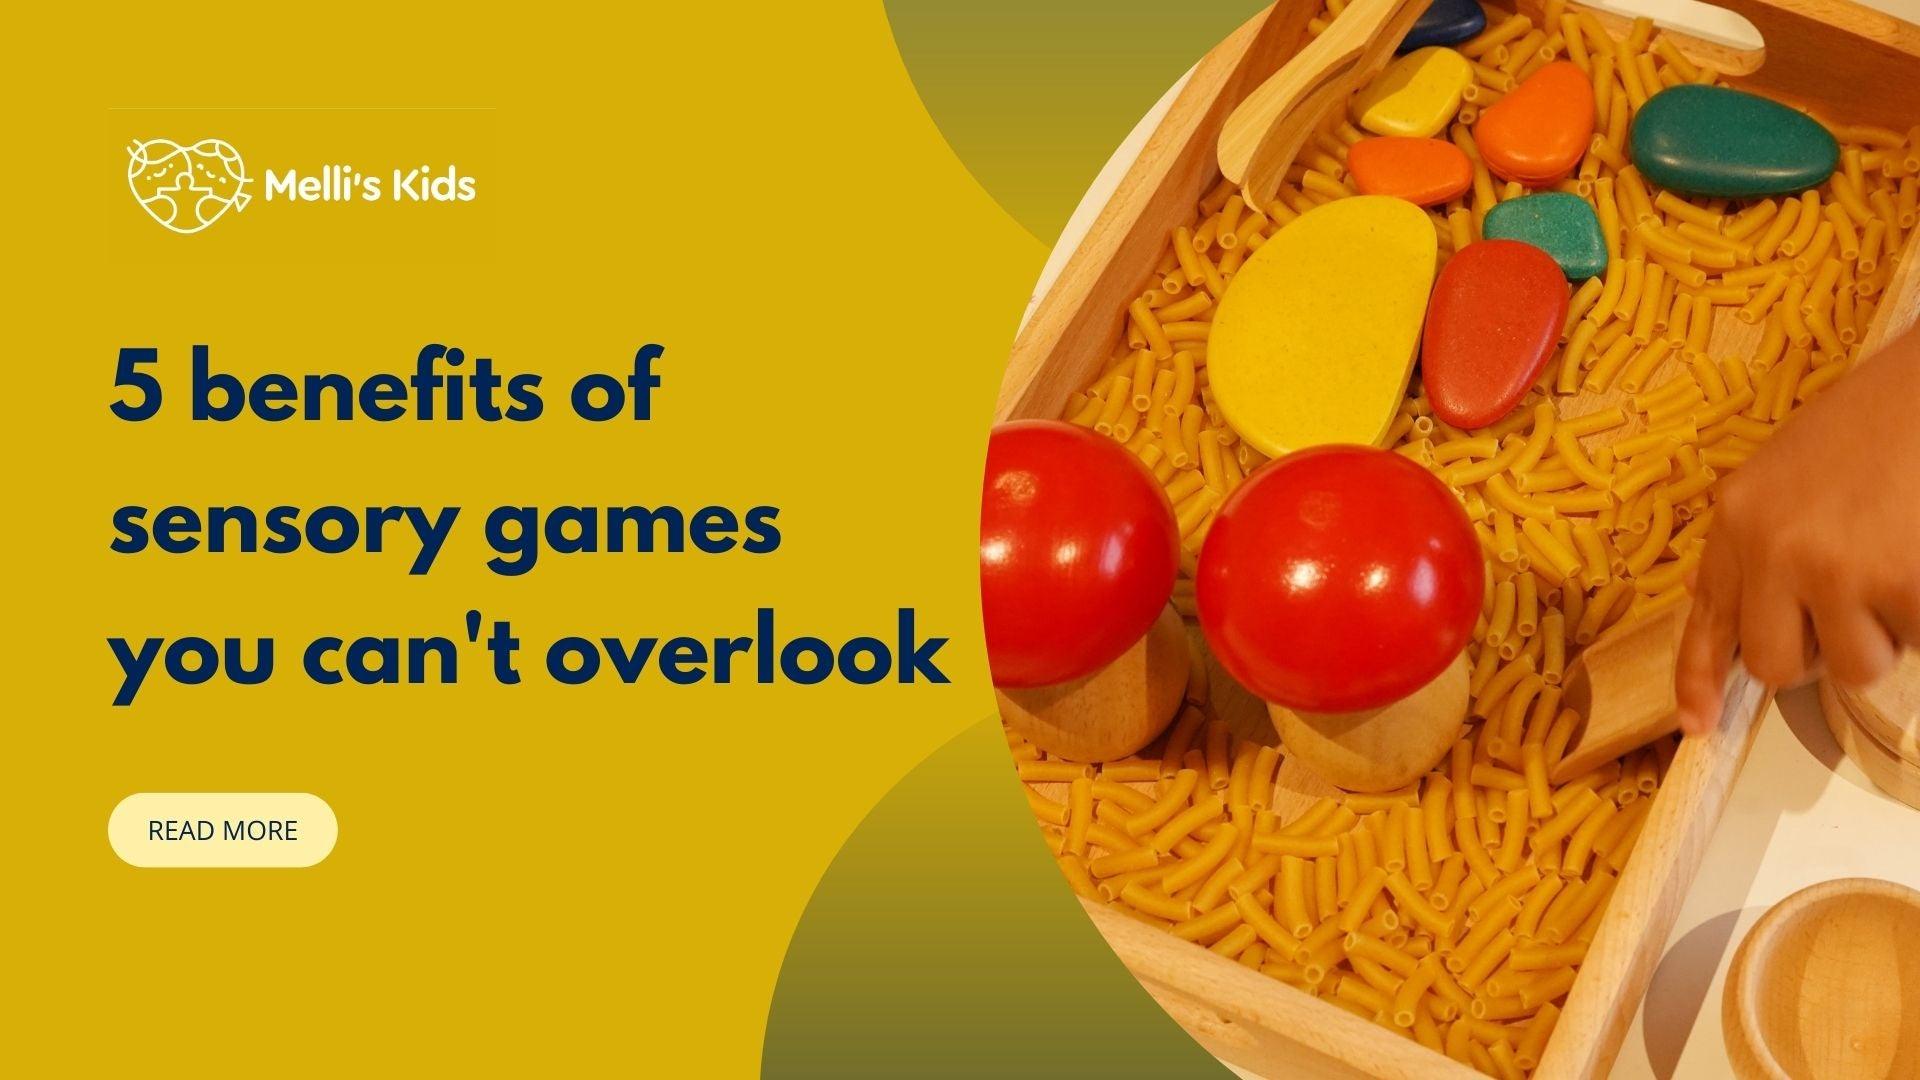 5 benefits of sensory games you can't overlook - Melli's Kids